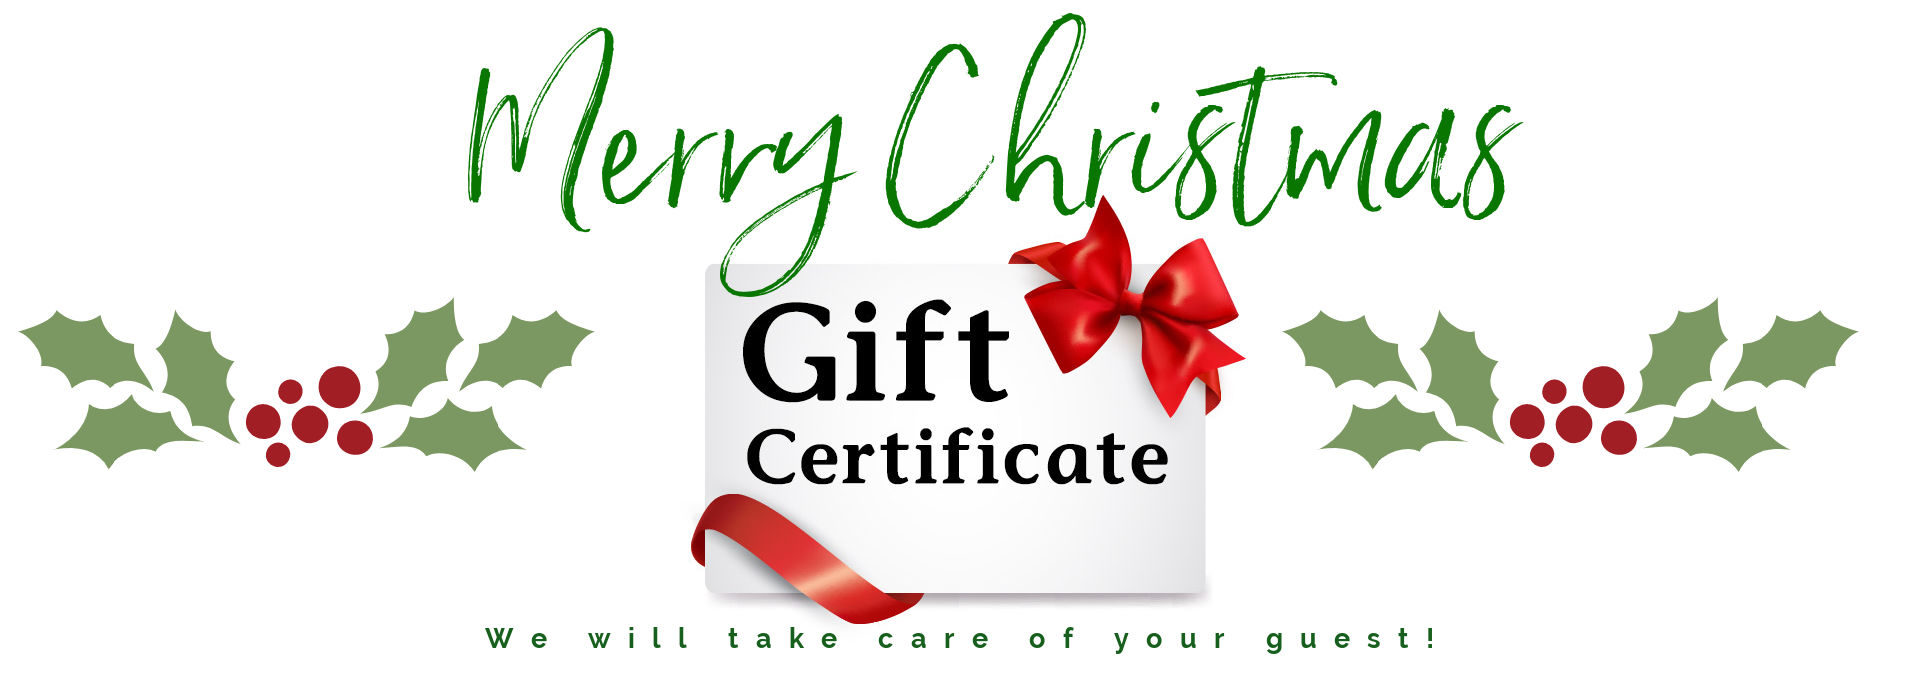 red and green text on gift certificate sign